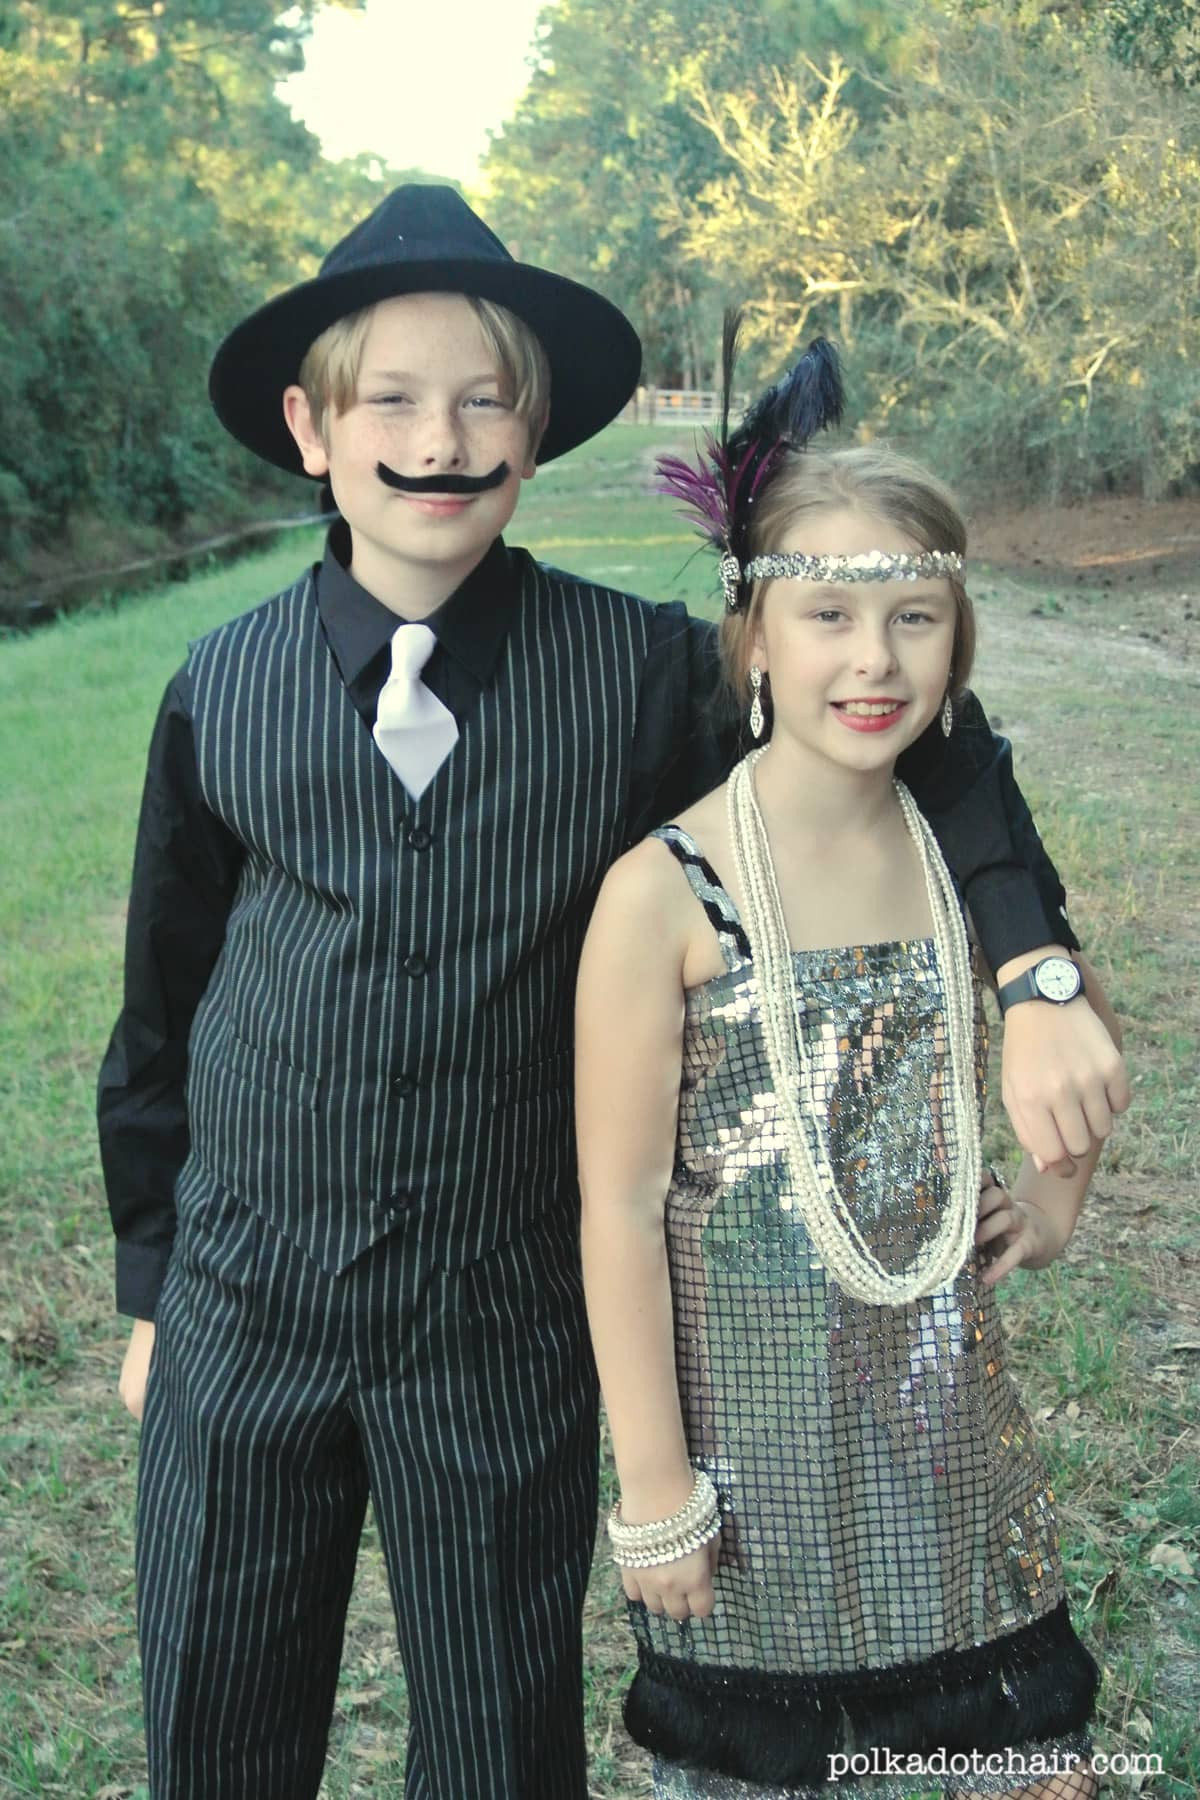 Couple Costumes Ideas For Halloween
 Flapper Halloween Costume Ideas The Polka Dot Chair